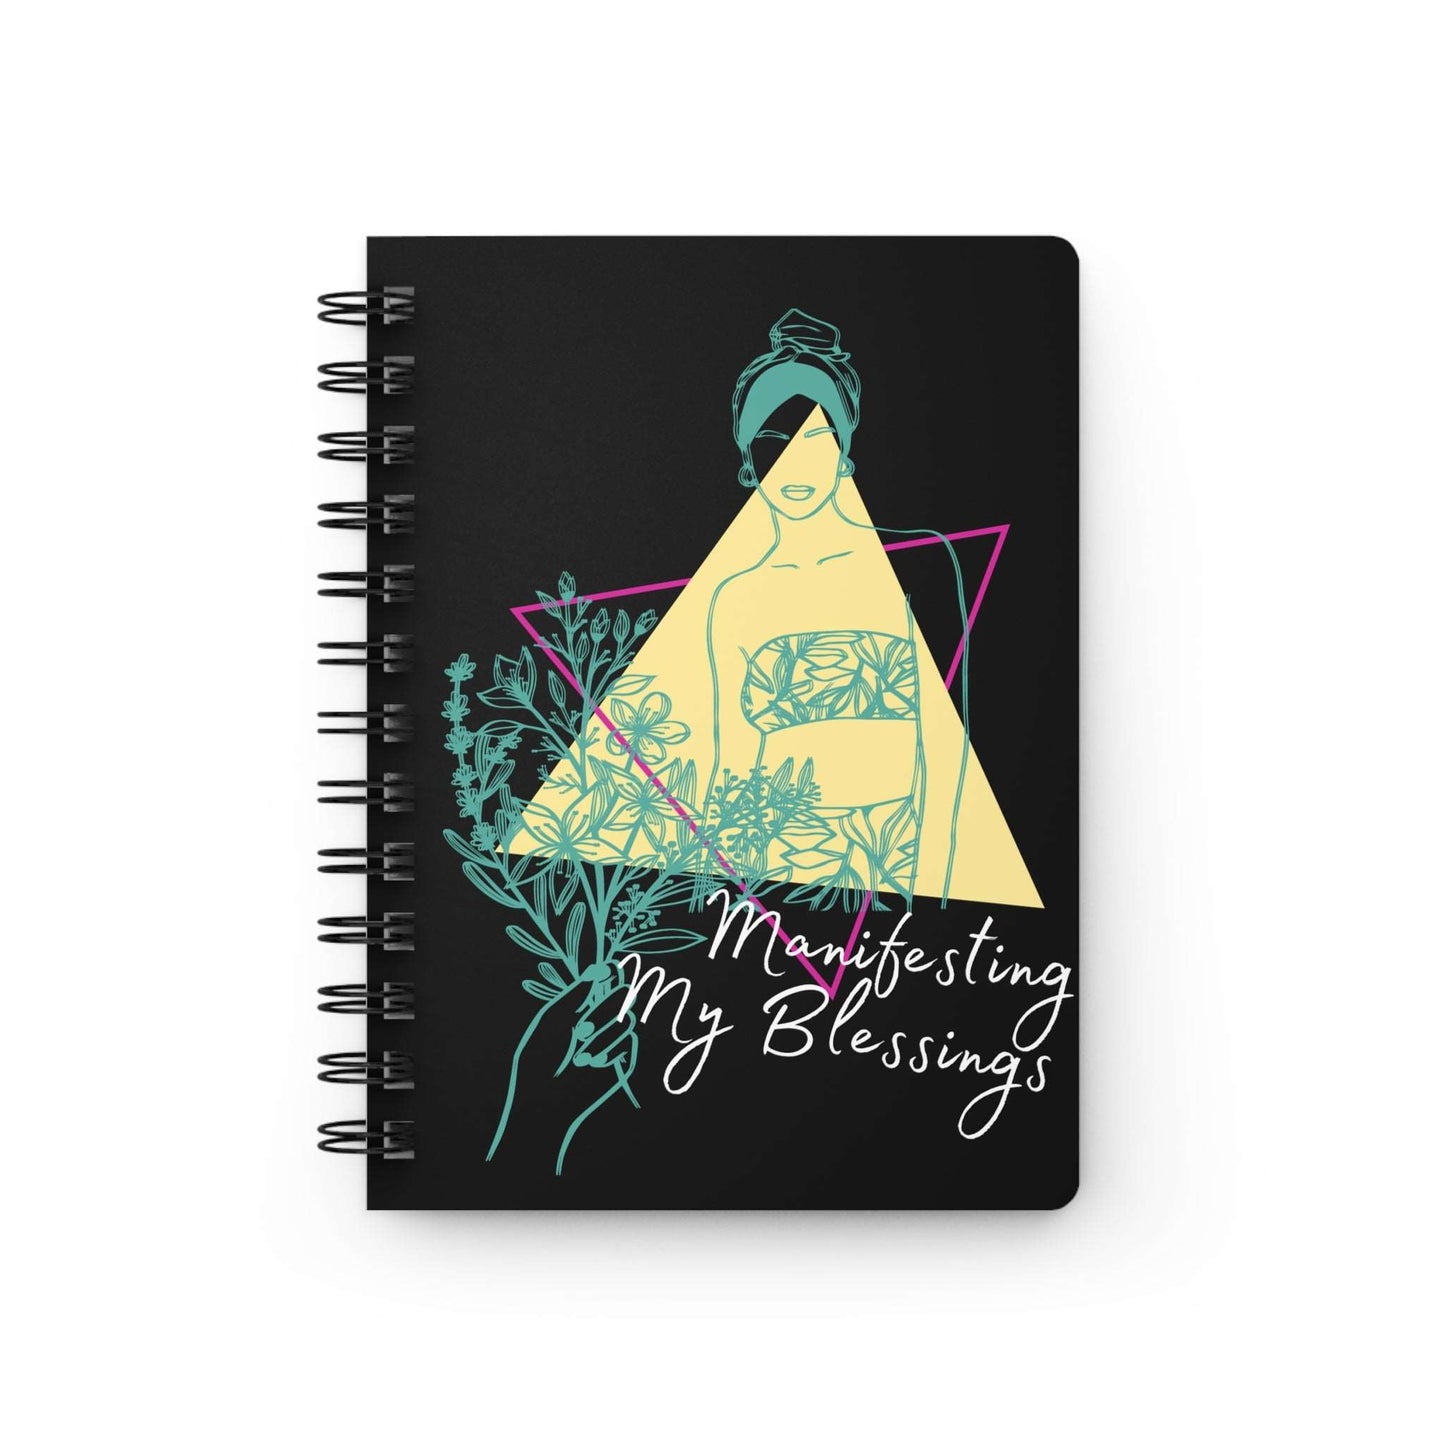 A spiral notebook with the words 'Manifesting My Blessings' on it, serving as an affirmation journal for magnifying my blessings through the law of attraction.